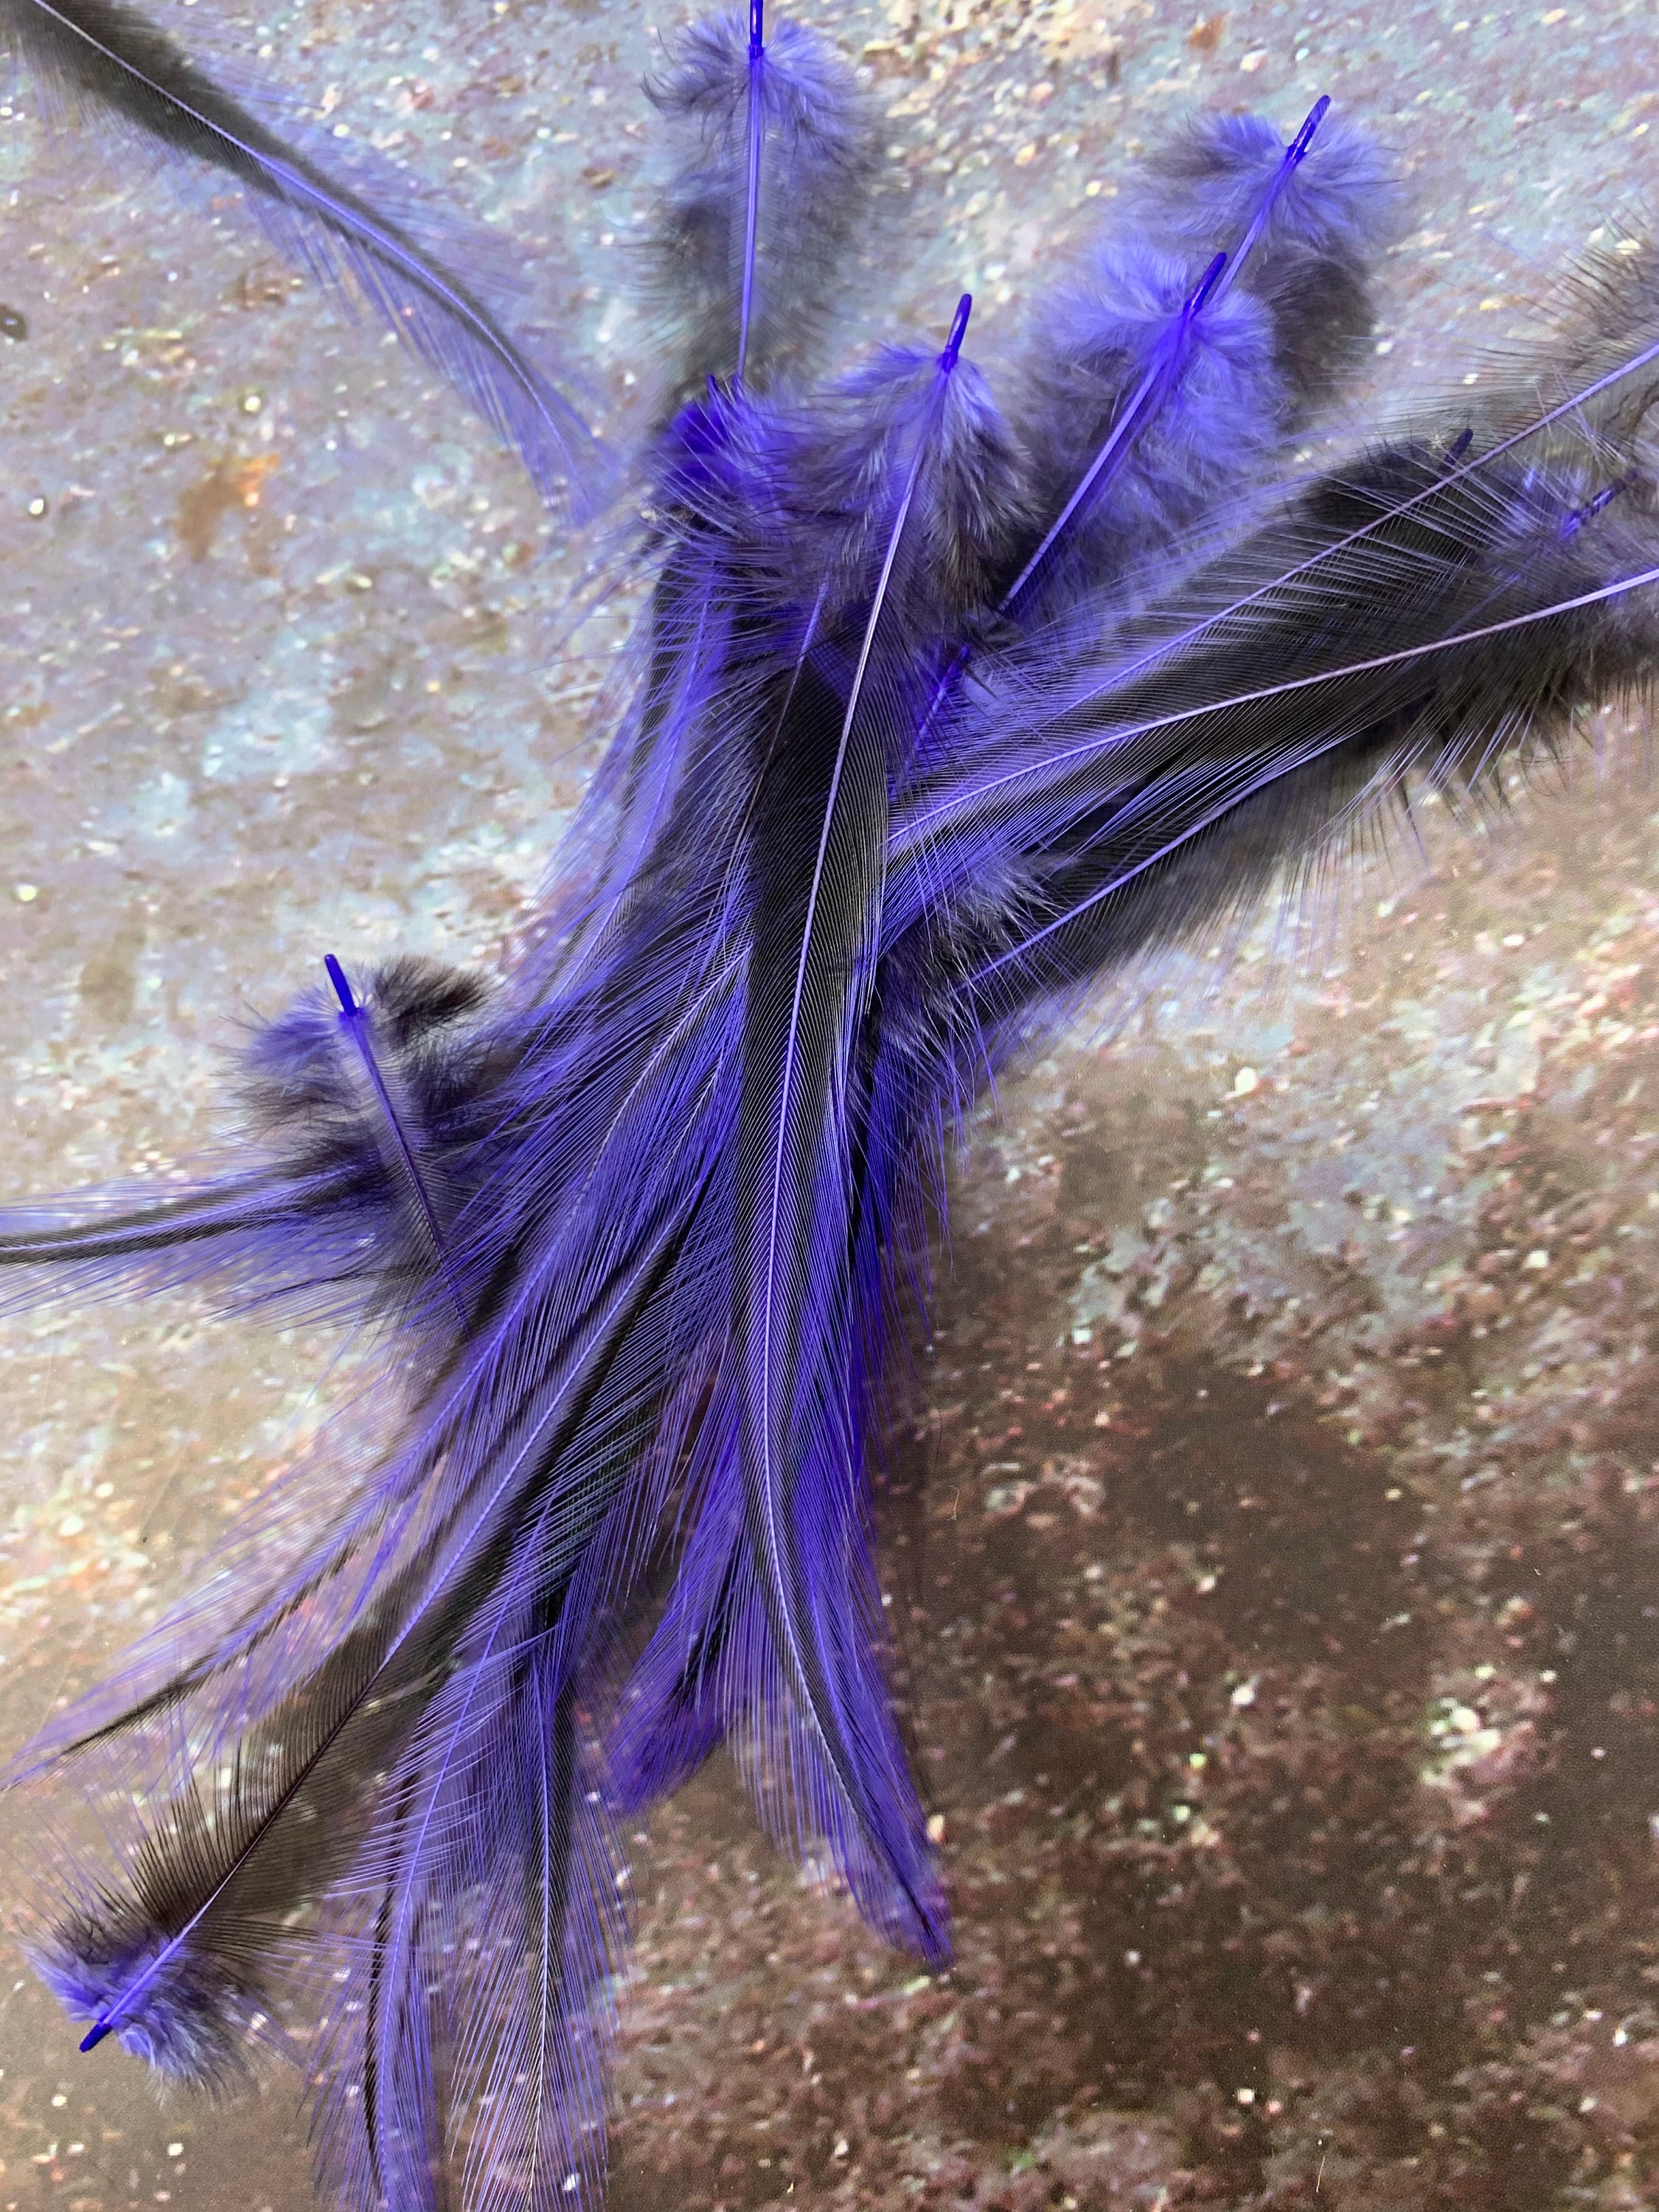 Violet Craft Feathers Purple Laced Rooster Saddle Feathers for Crafts  Decorating Purple Feathers for Earrings 12 per Pack 